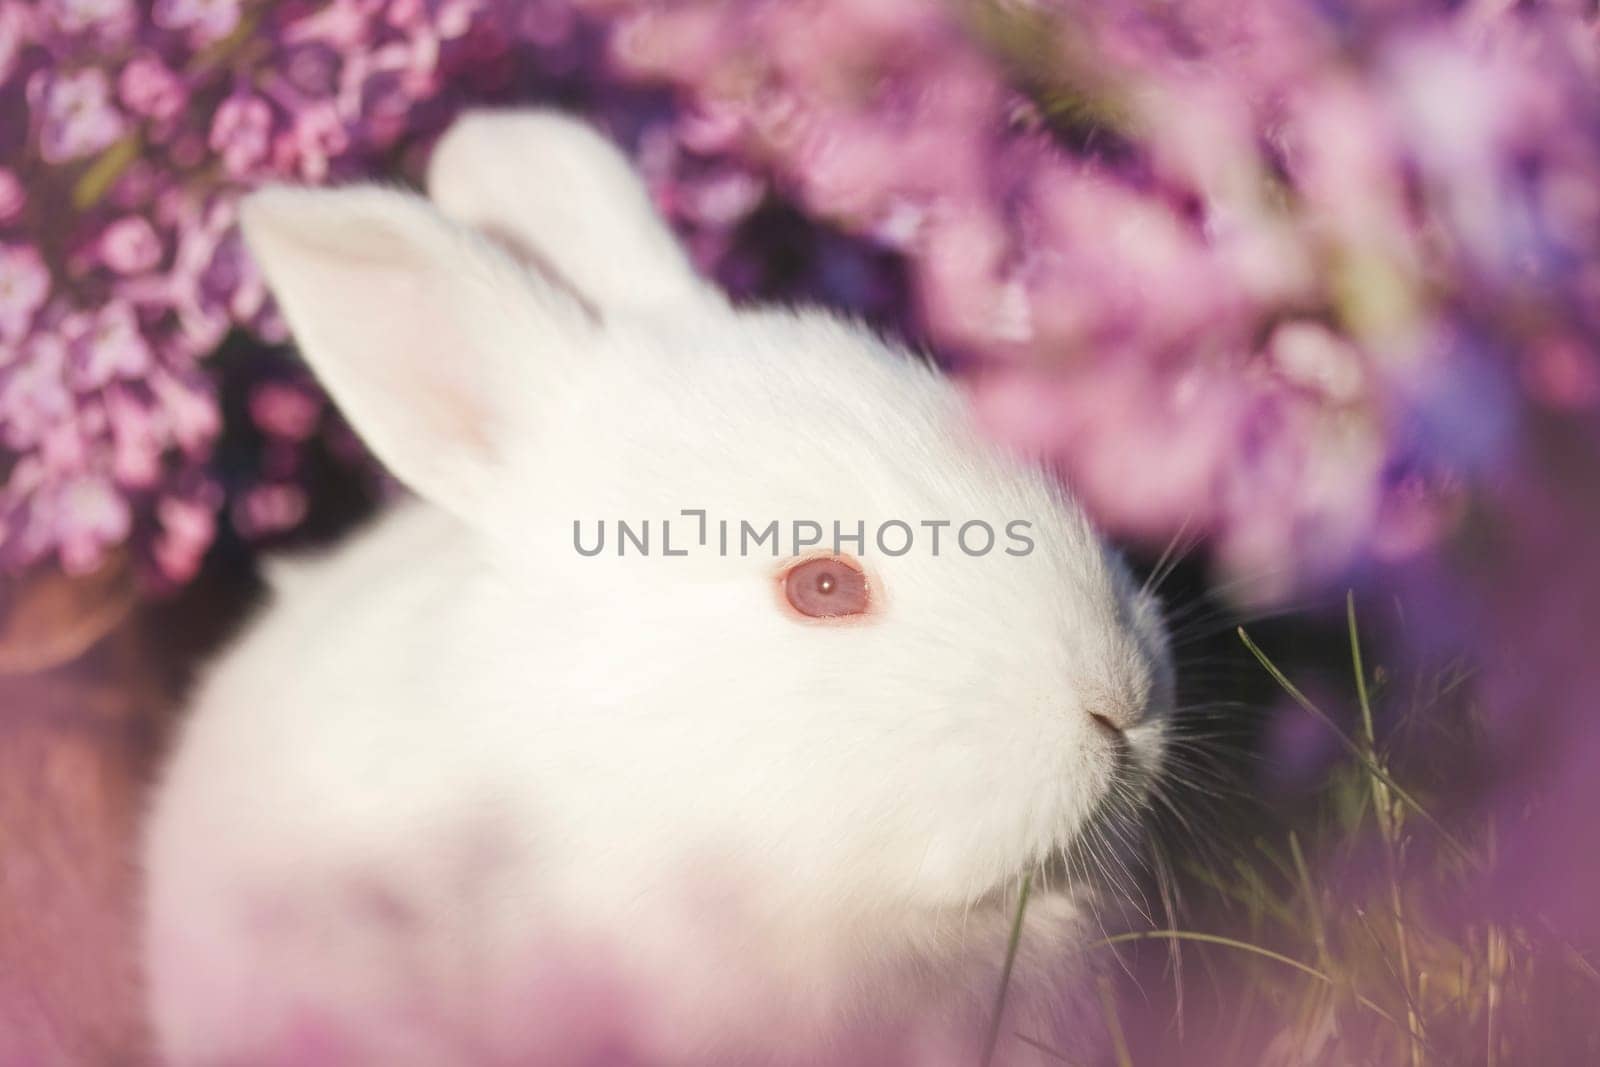 cute white rabbit close-up portrait in lilac flowers, animals baby , easter